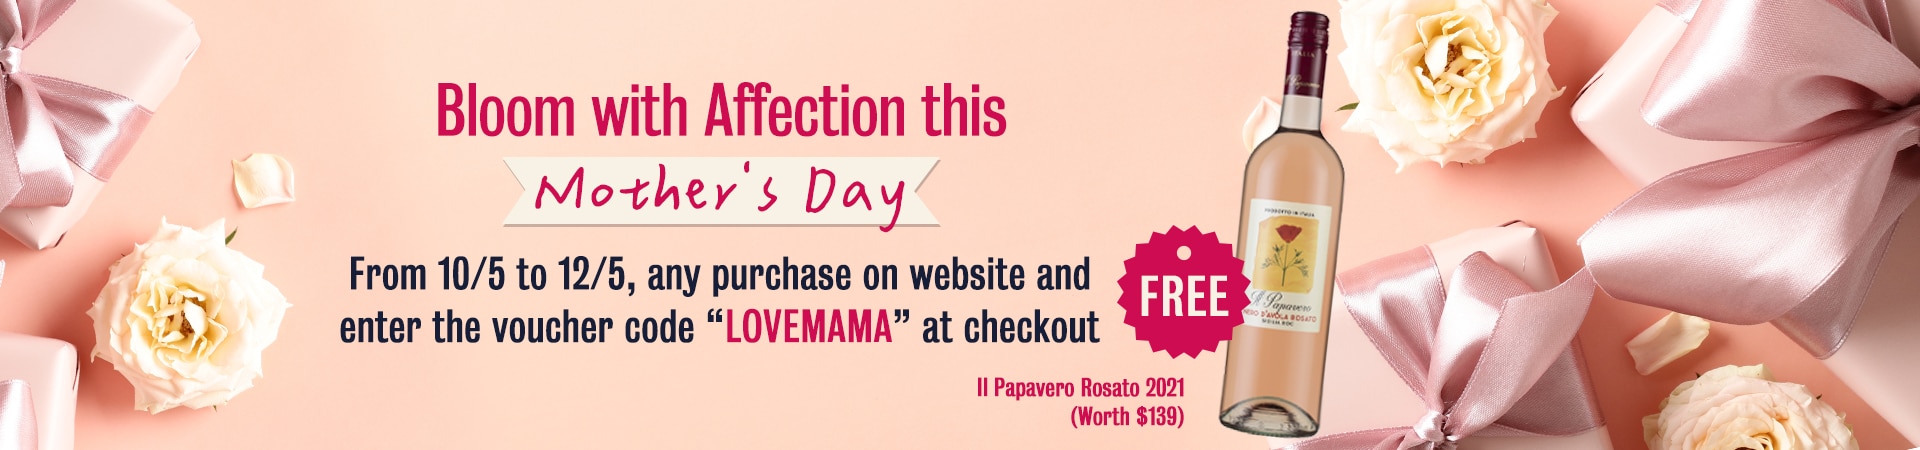 Bloom with Affection this Mother's Day